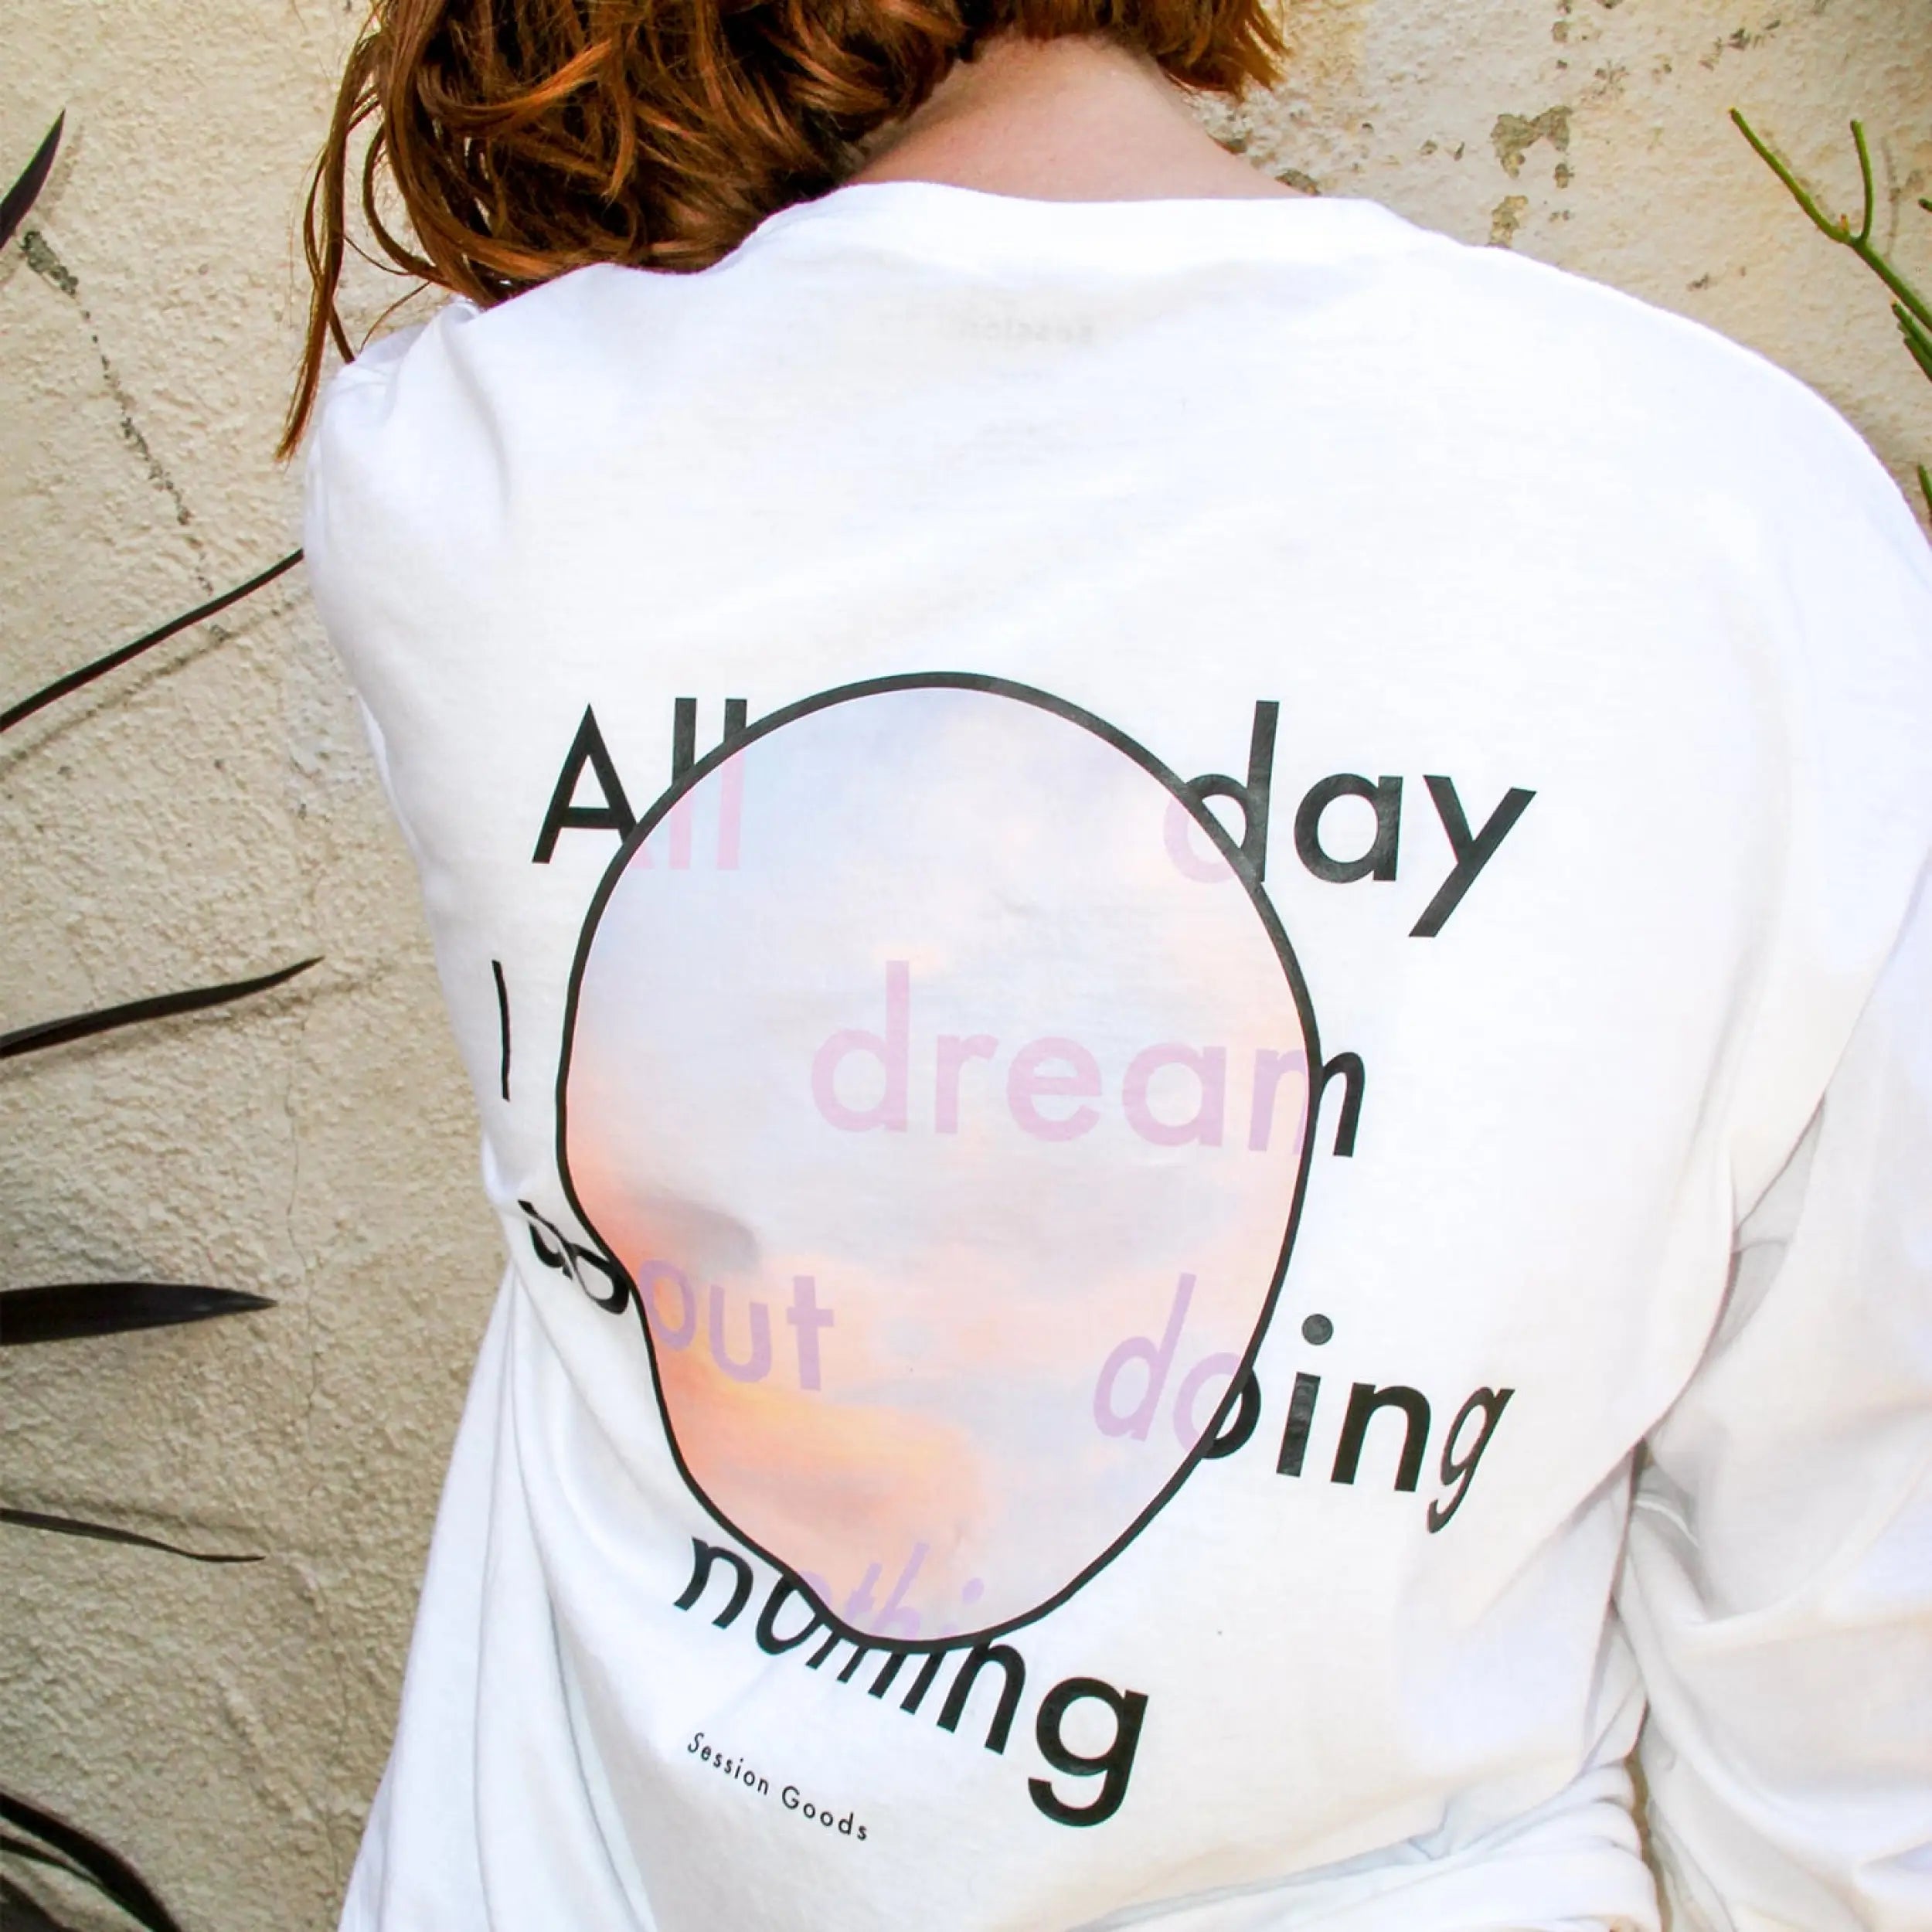 Dreamy comfort: Our long sleeve tee features a laid-back graphic for all-day chill.